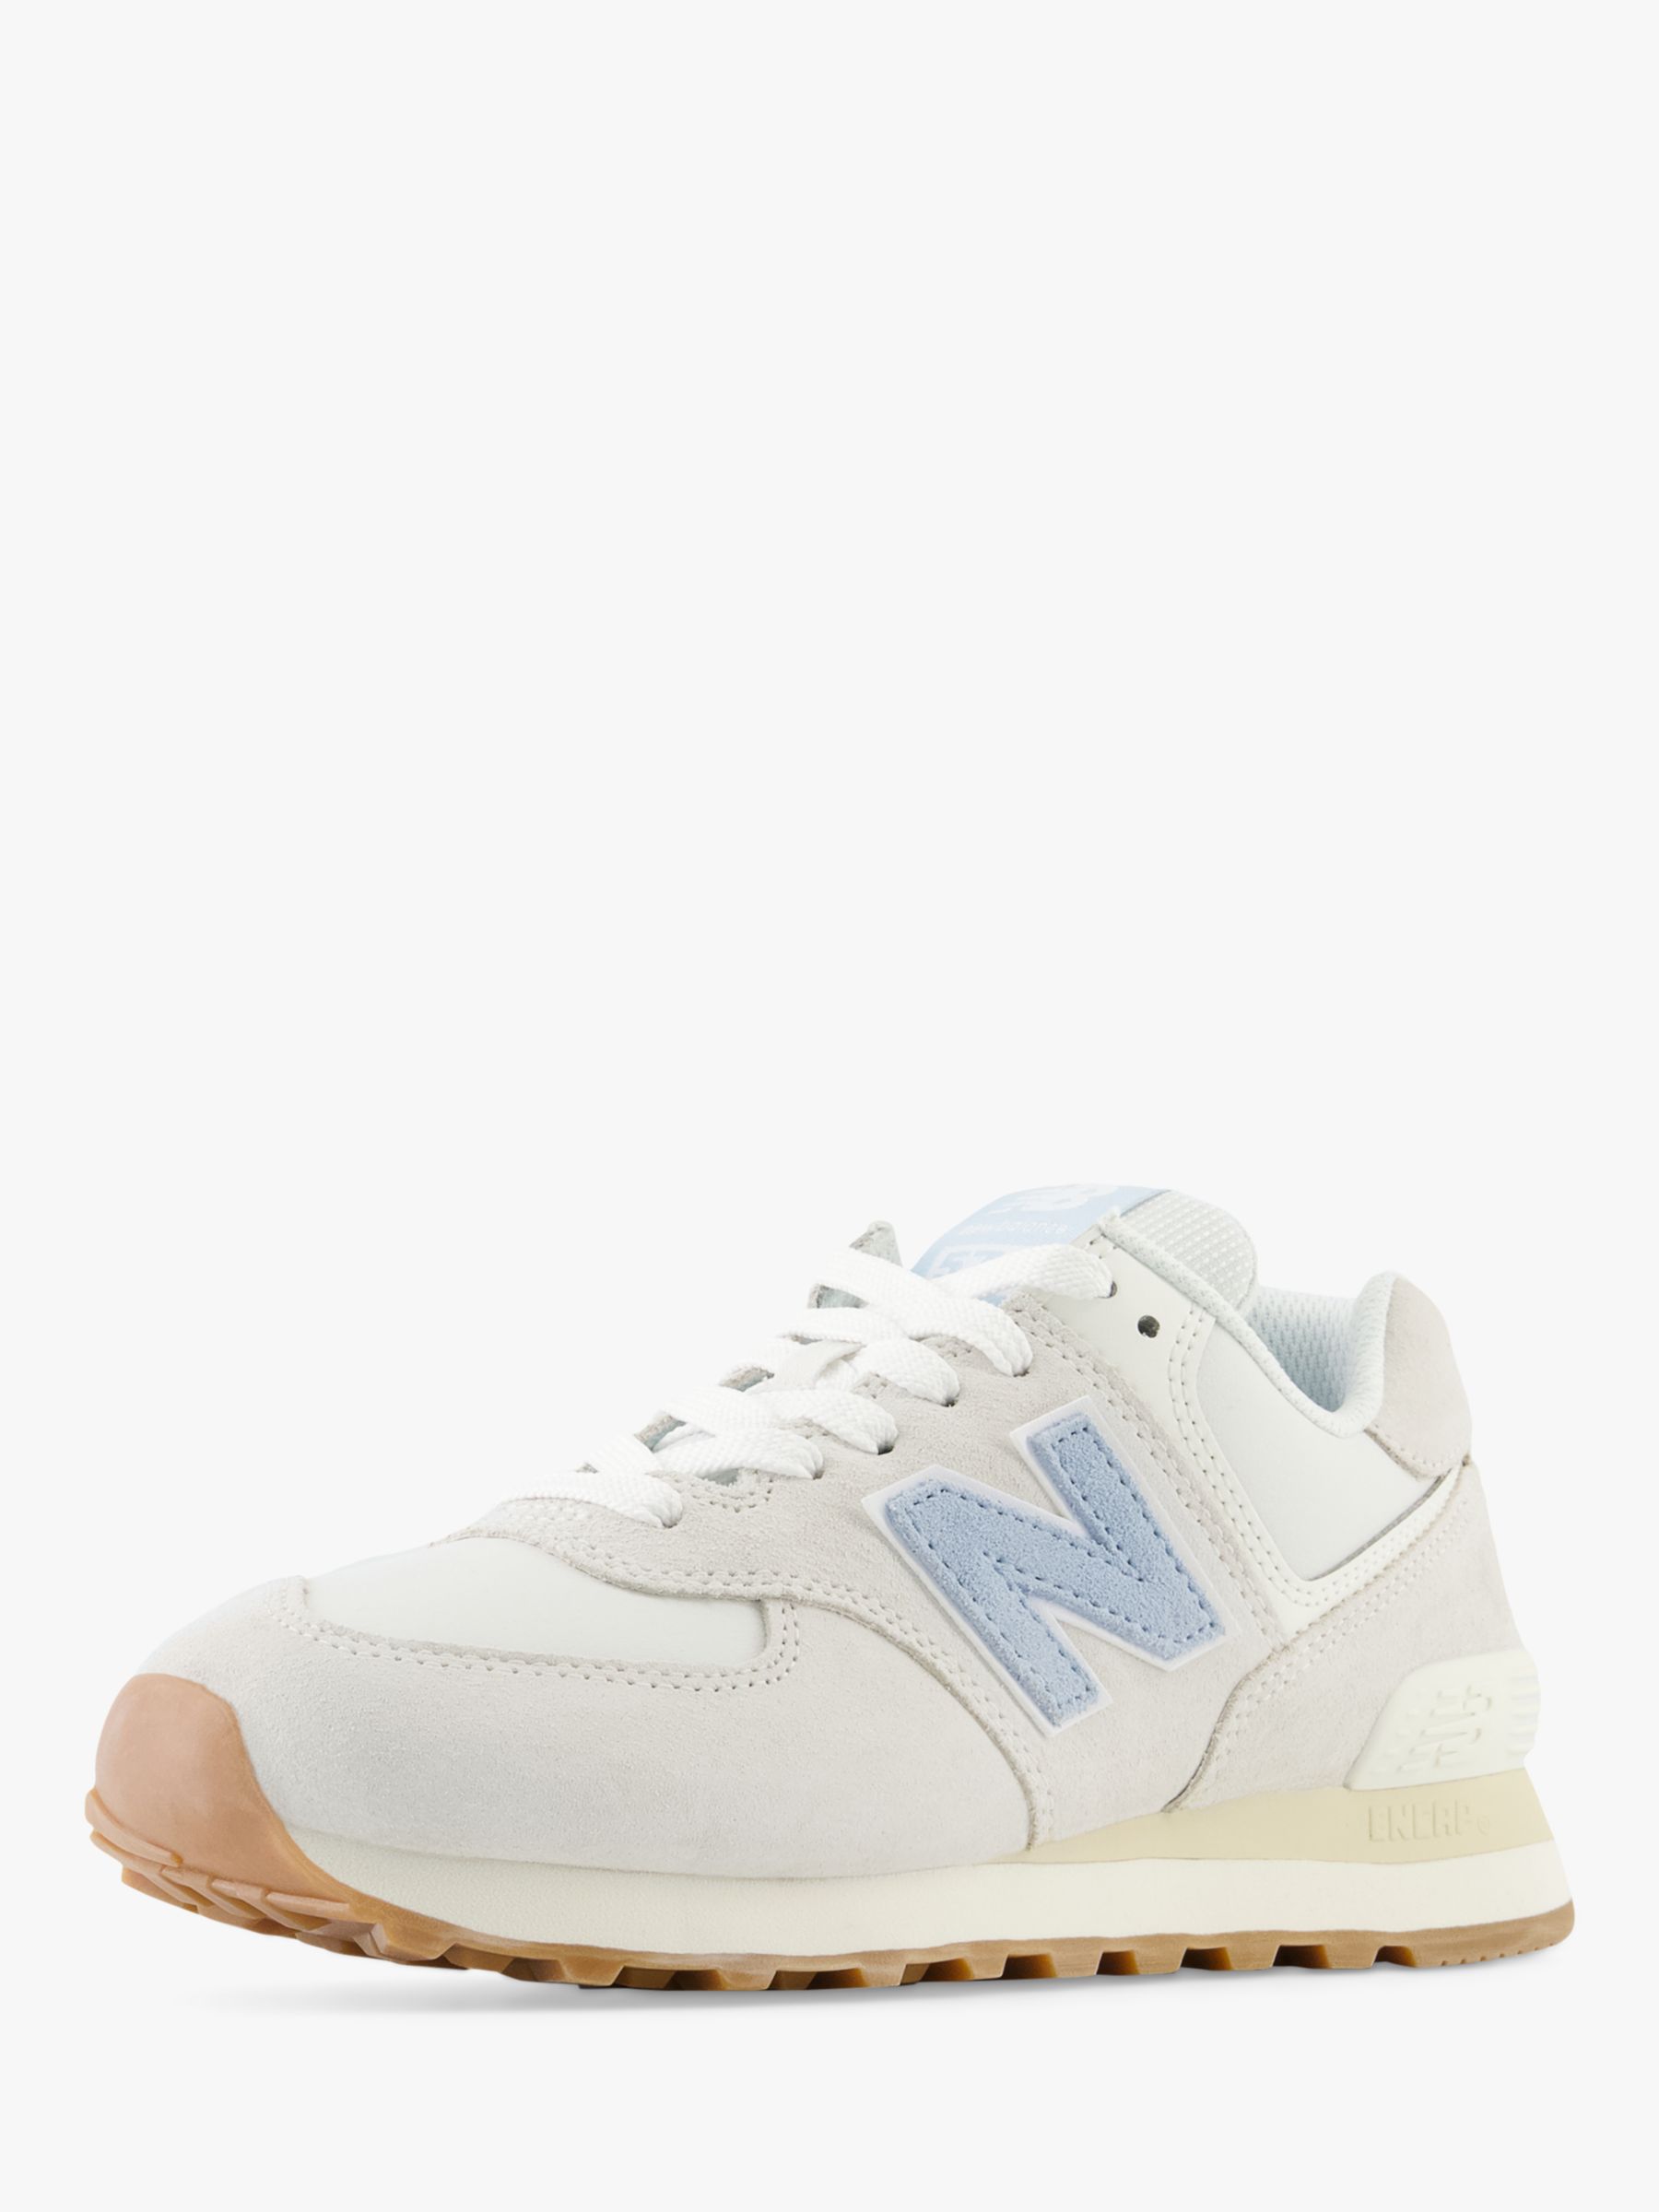 New Balance 574 Suede Mesh Trainers, Reflection at John Lewis & Partners